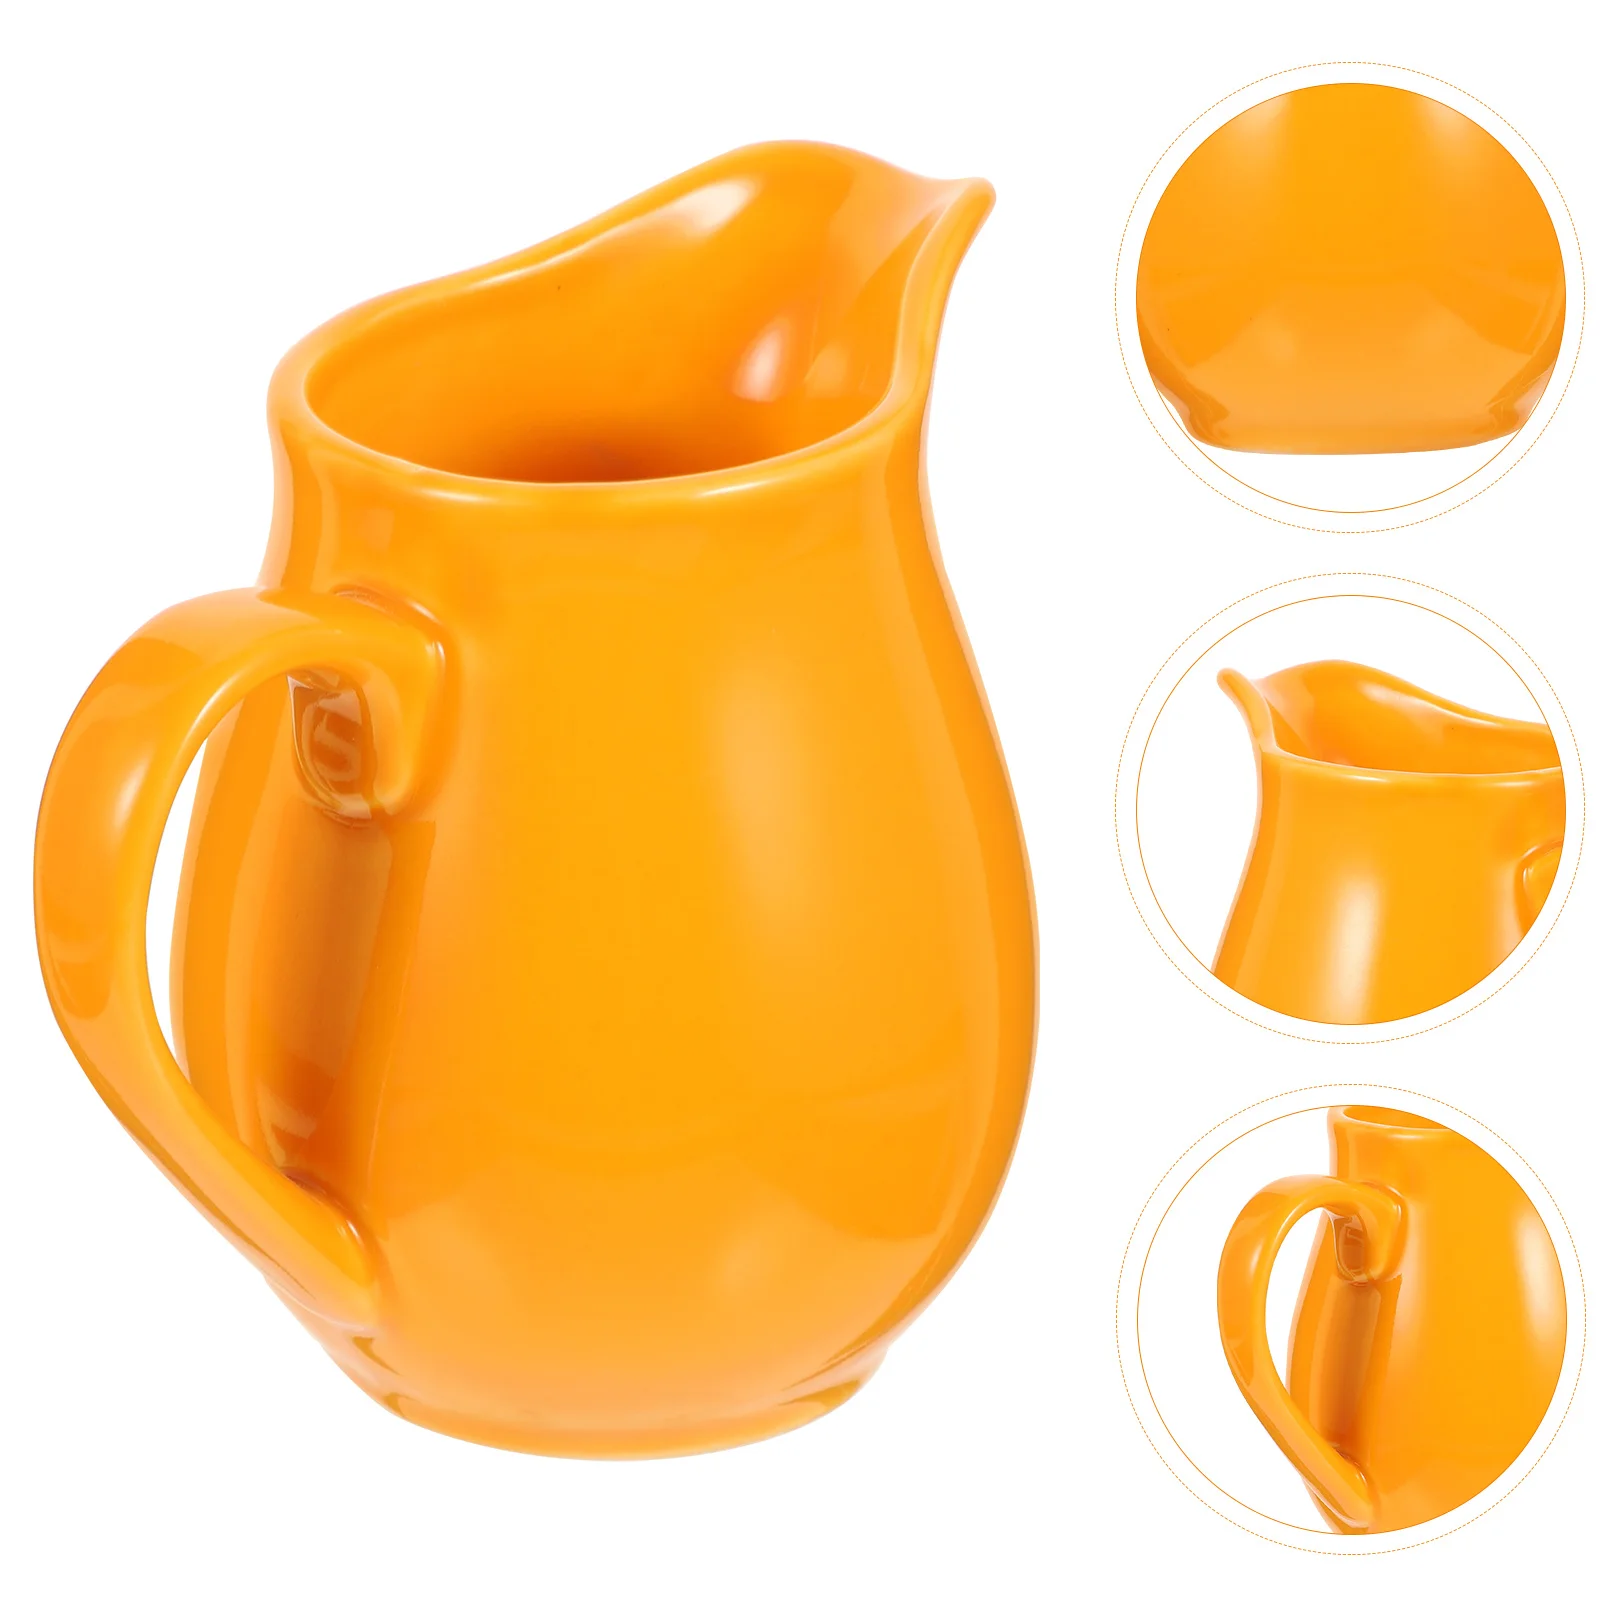 

Sauce Gravy Pitcher Creamer Jug Ceramic Boat Pourer Mini Serving Bowl Pot Soy Dishes Tea Coffee Cup Boats Container Dispenser